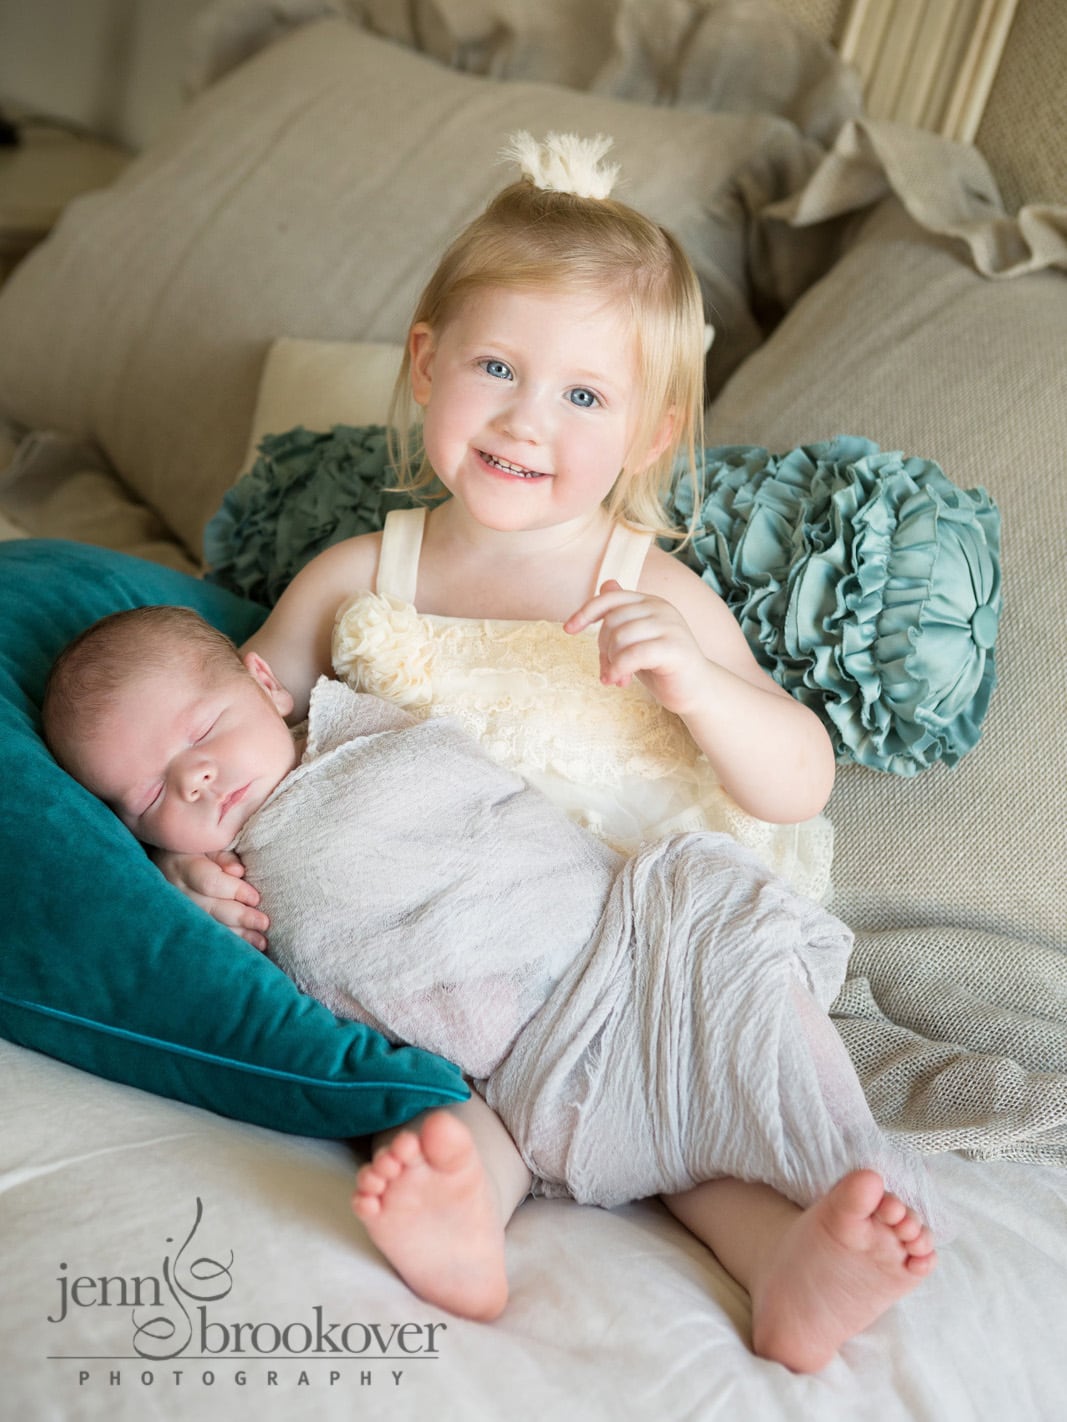 excited big sister smiling and holding her new baby brother at home during newborn session